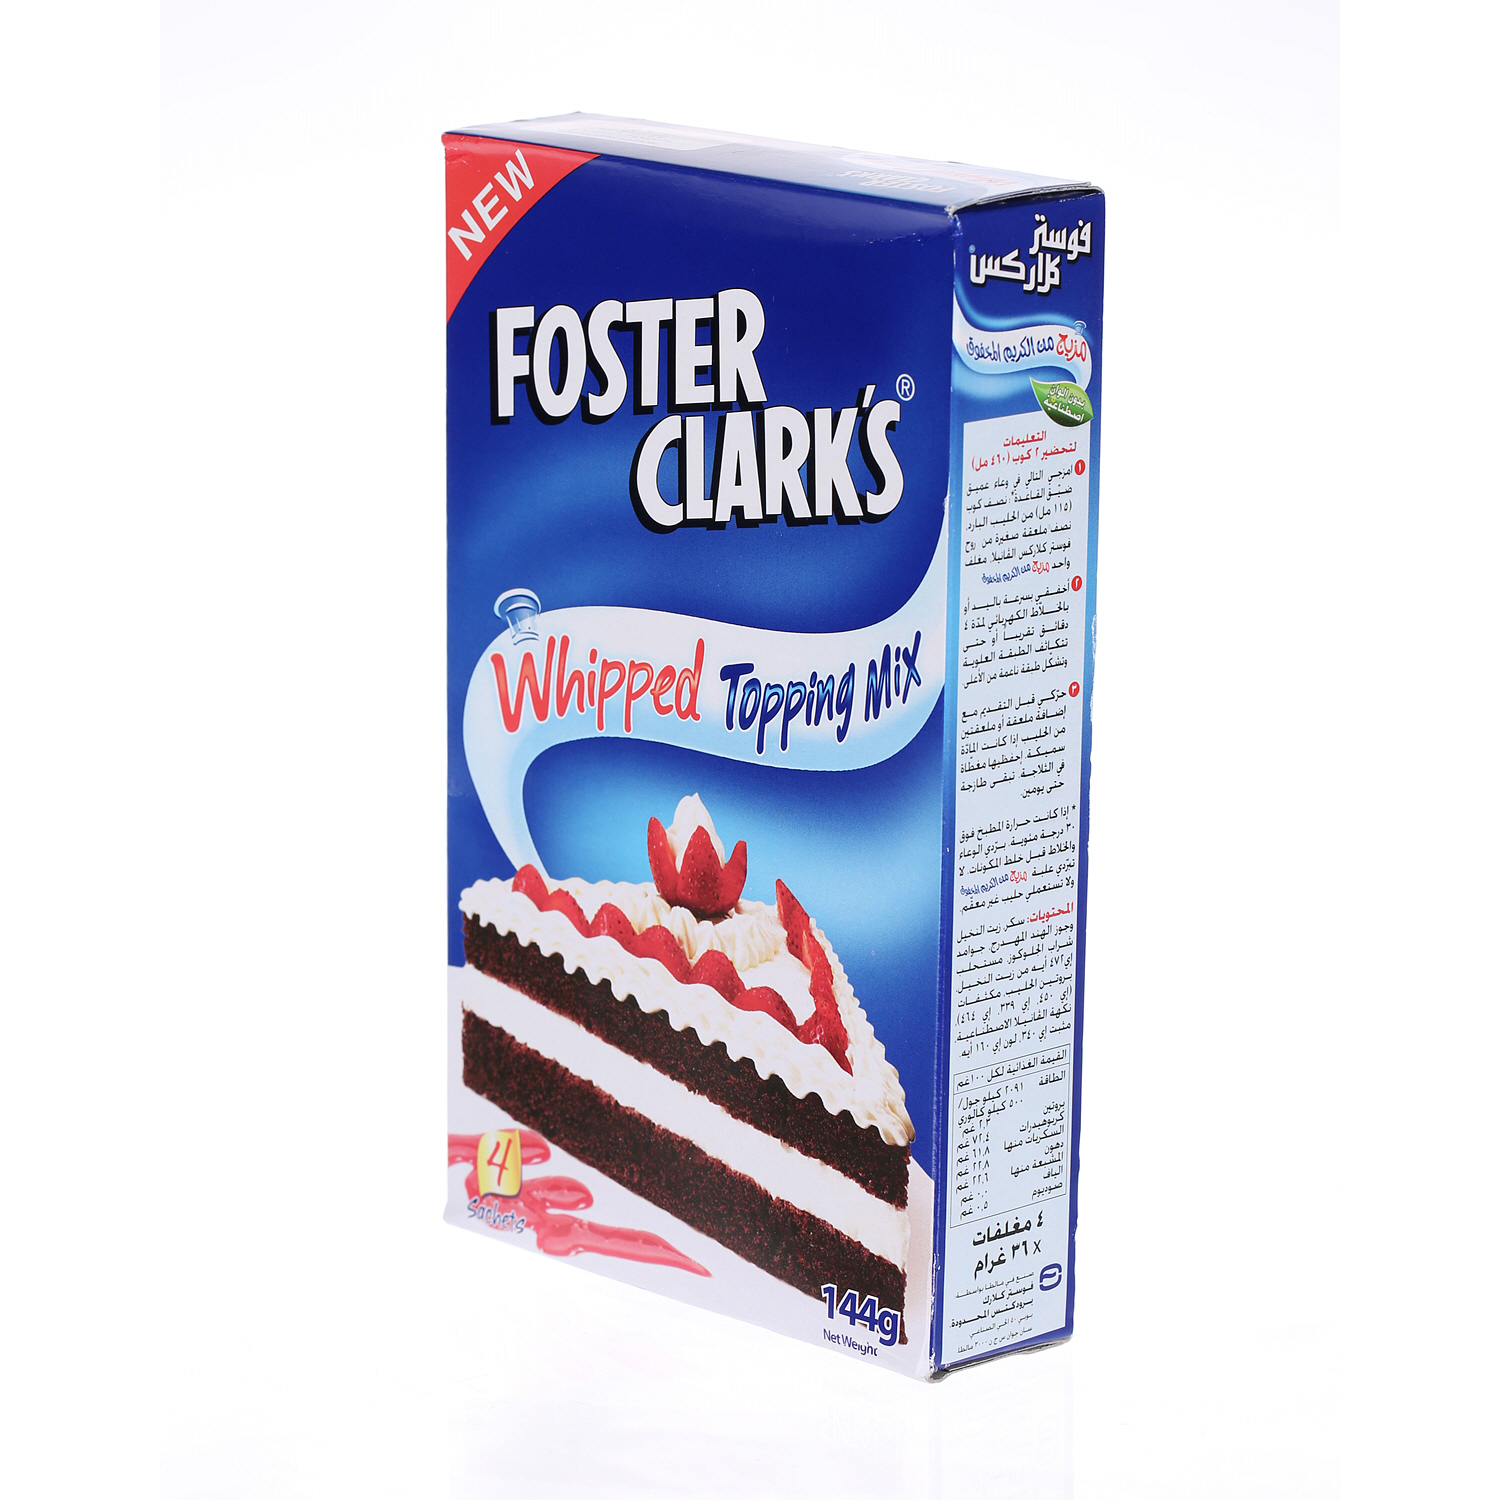 Foster Clarks Whipped Topping Mix 144gm